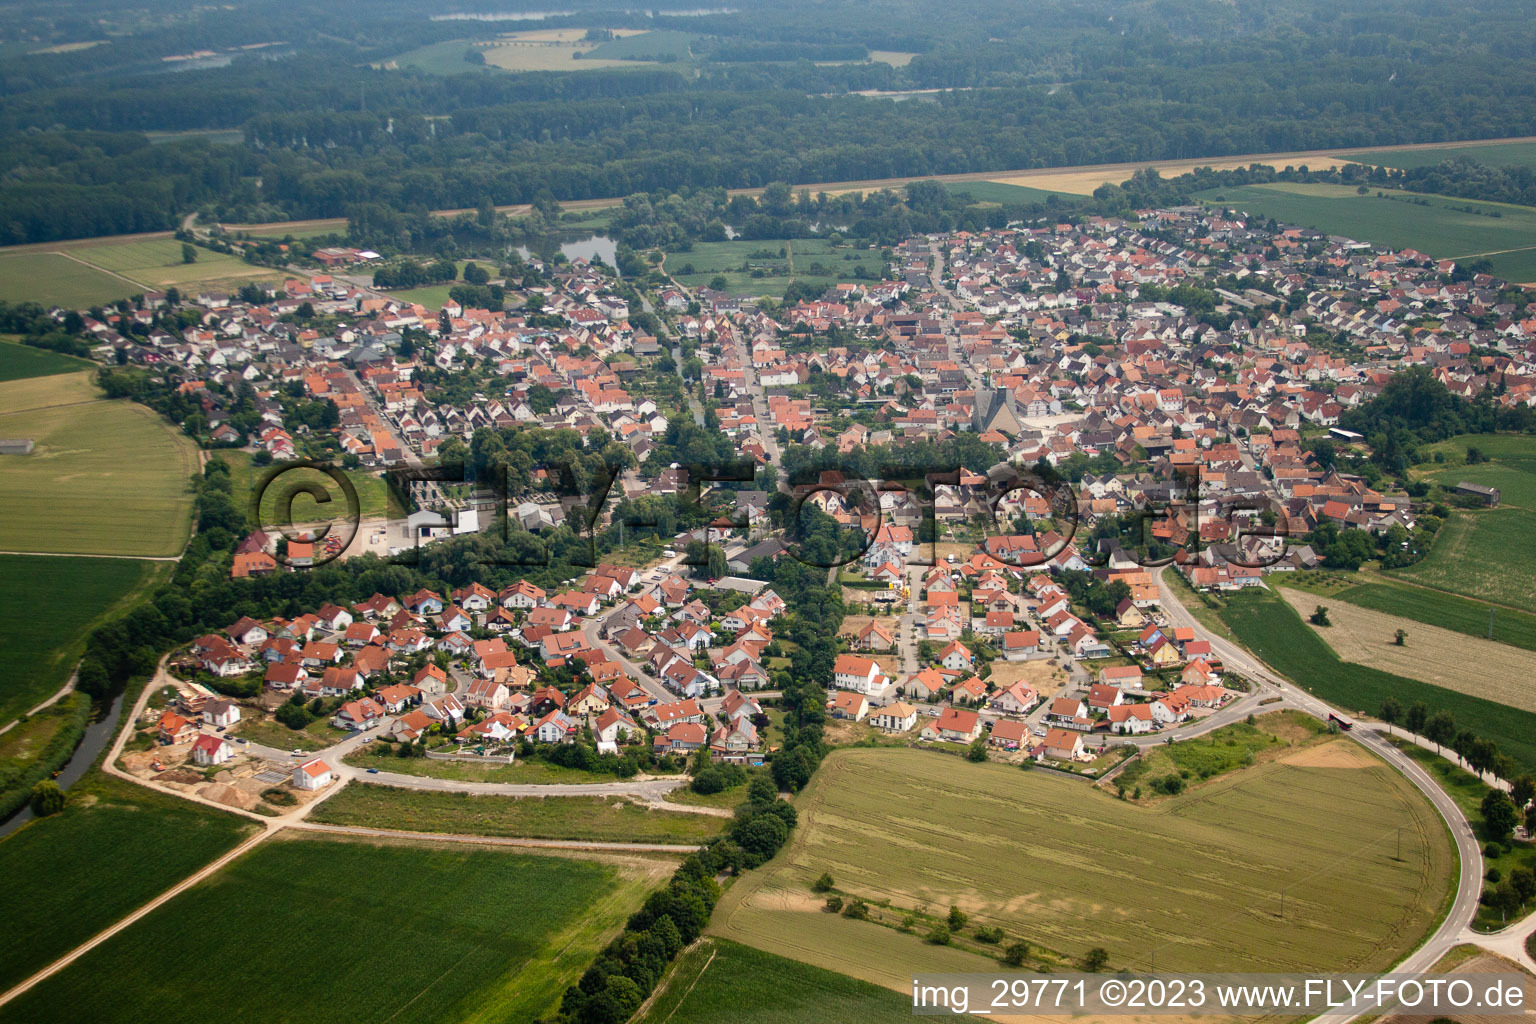 Leimersheim in the state Rhineland-Palatinate, Germany out of the air